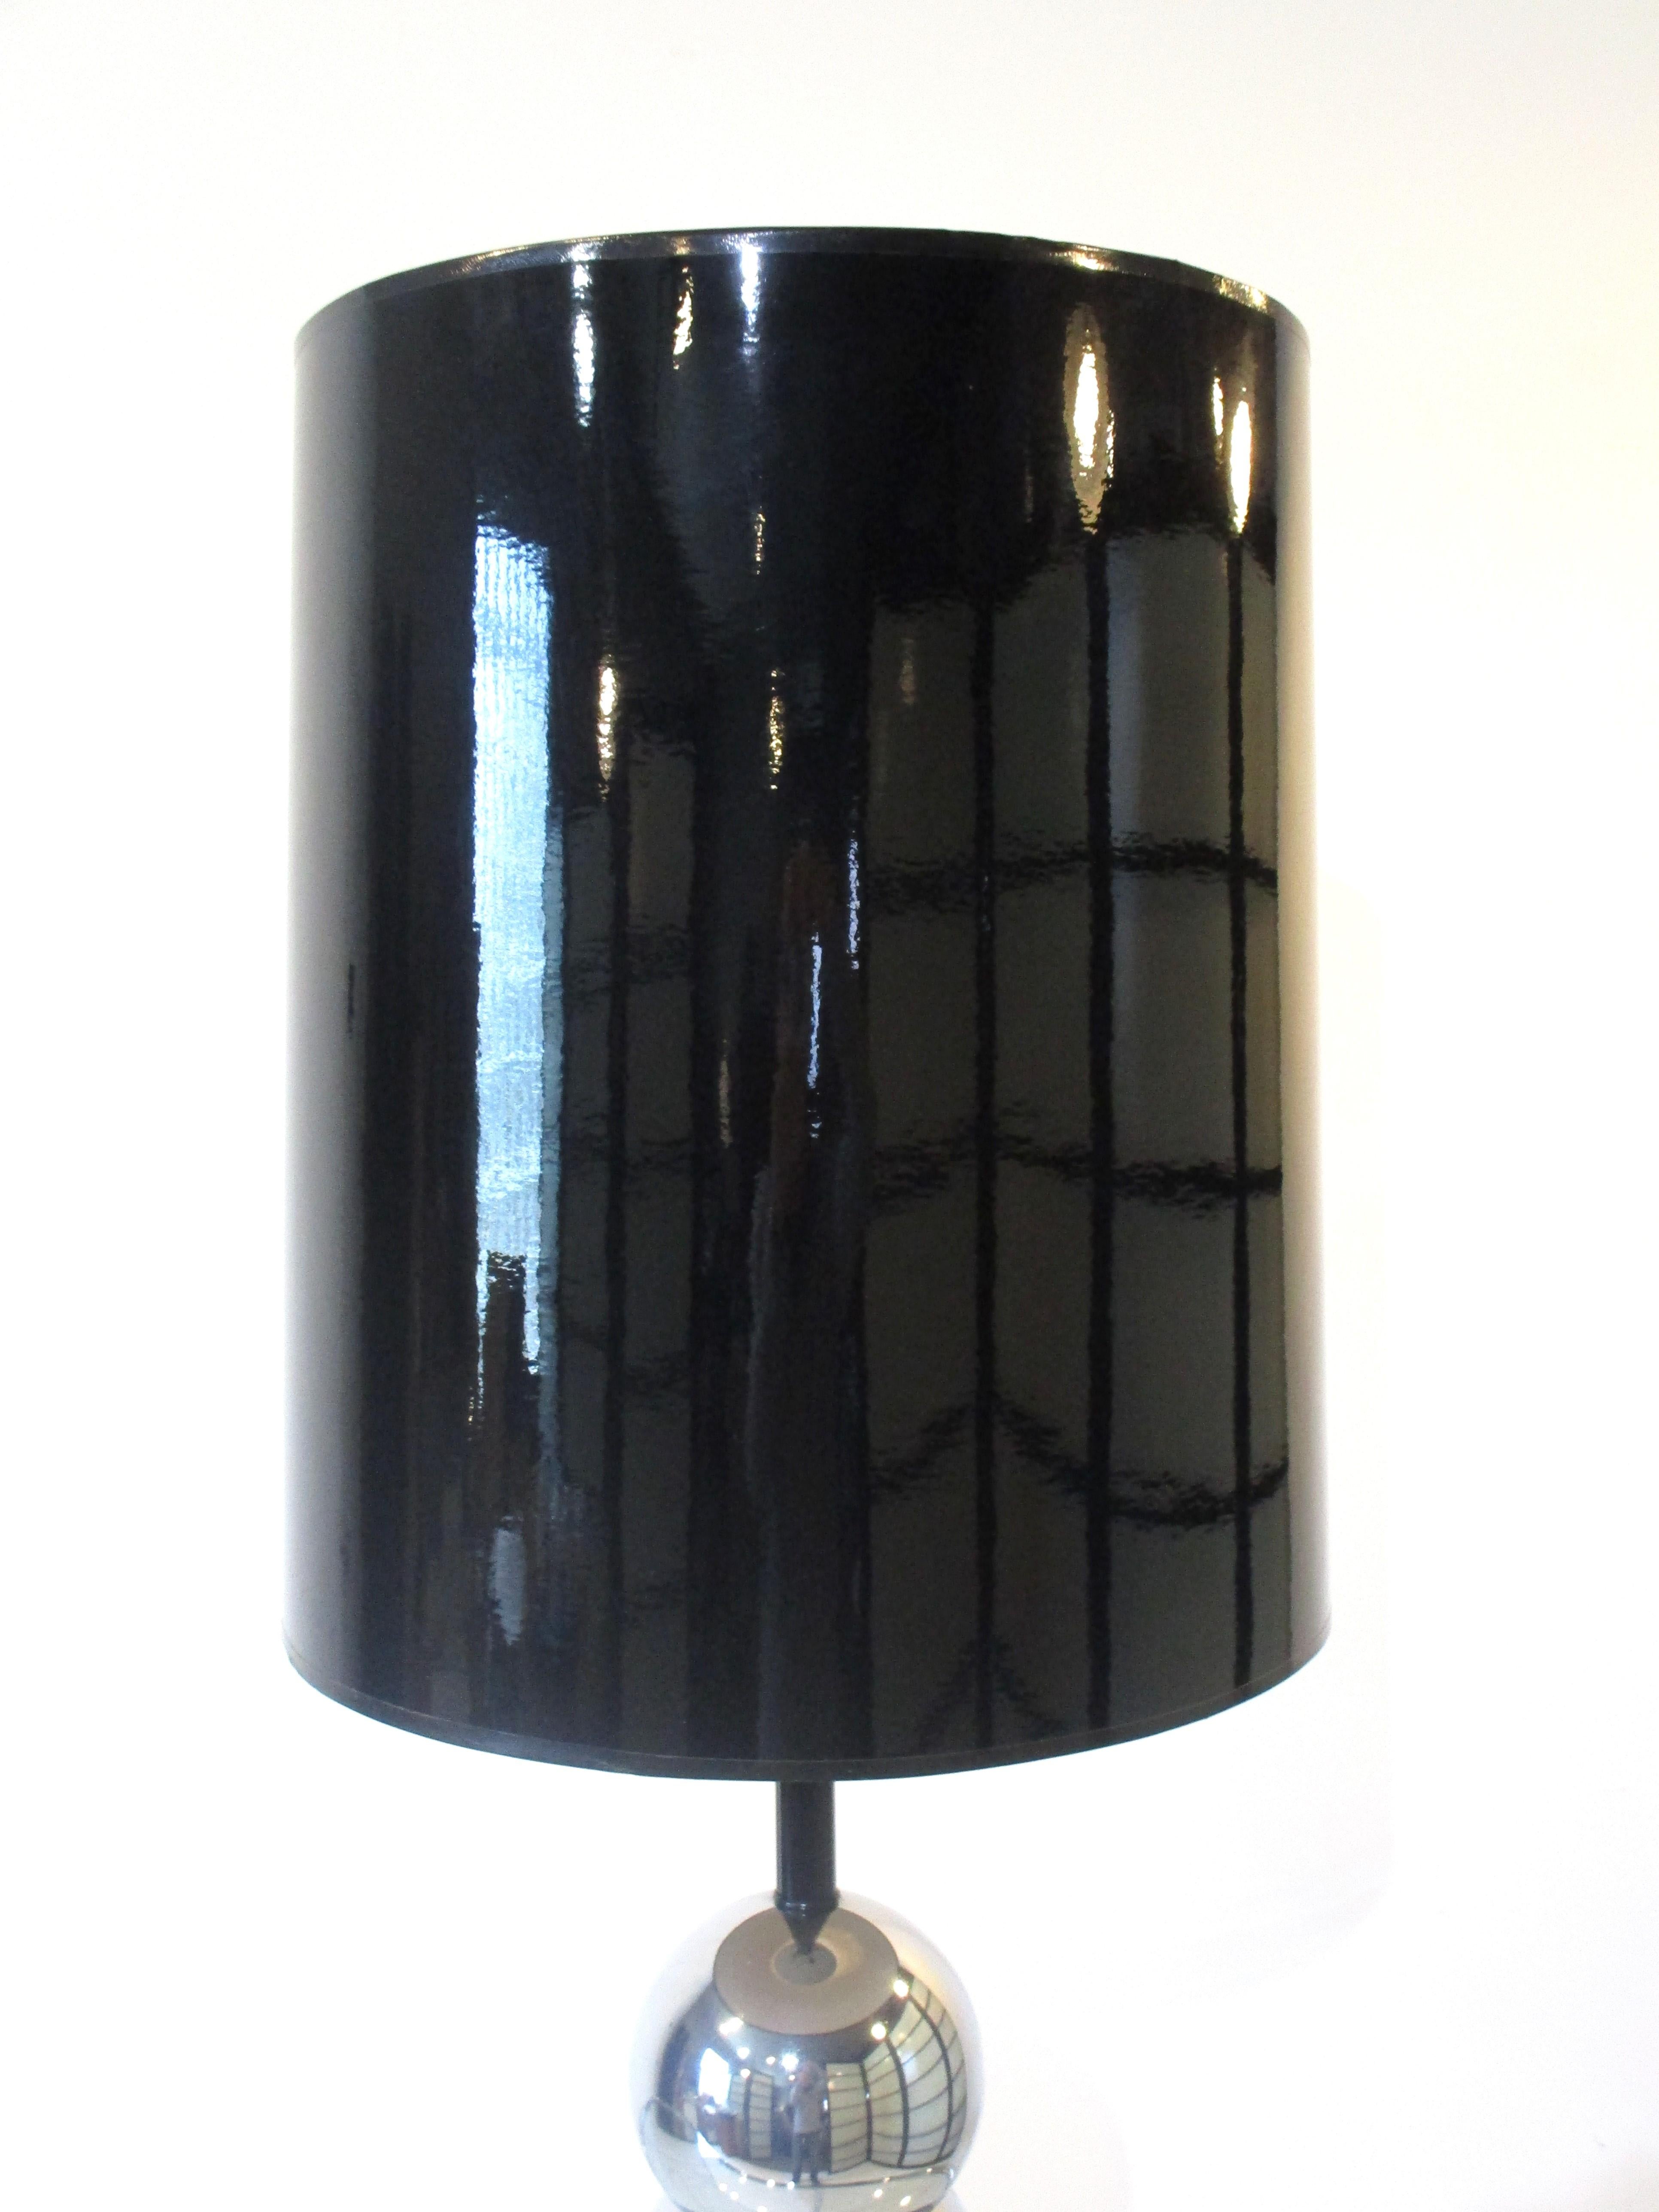 A stacked ball caterpillar styled chrome table lamp with a high gloss black barrel shade. Sitting on a satin black base and having a black matching socket shaft designed and manufactured by the Kovacs Lighting company.